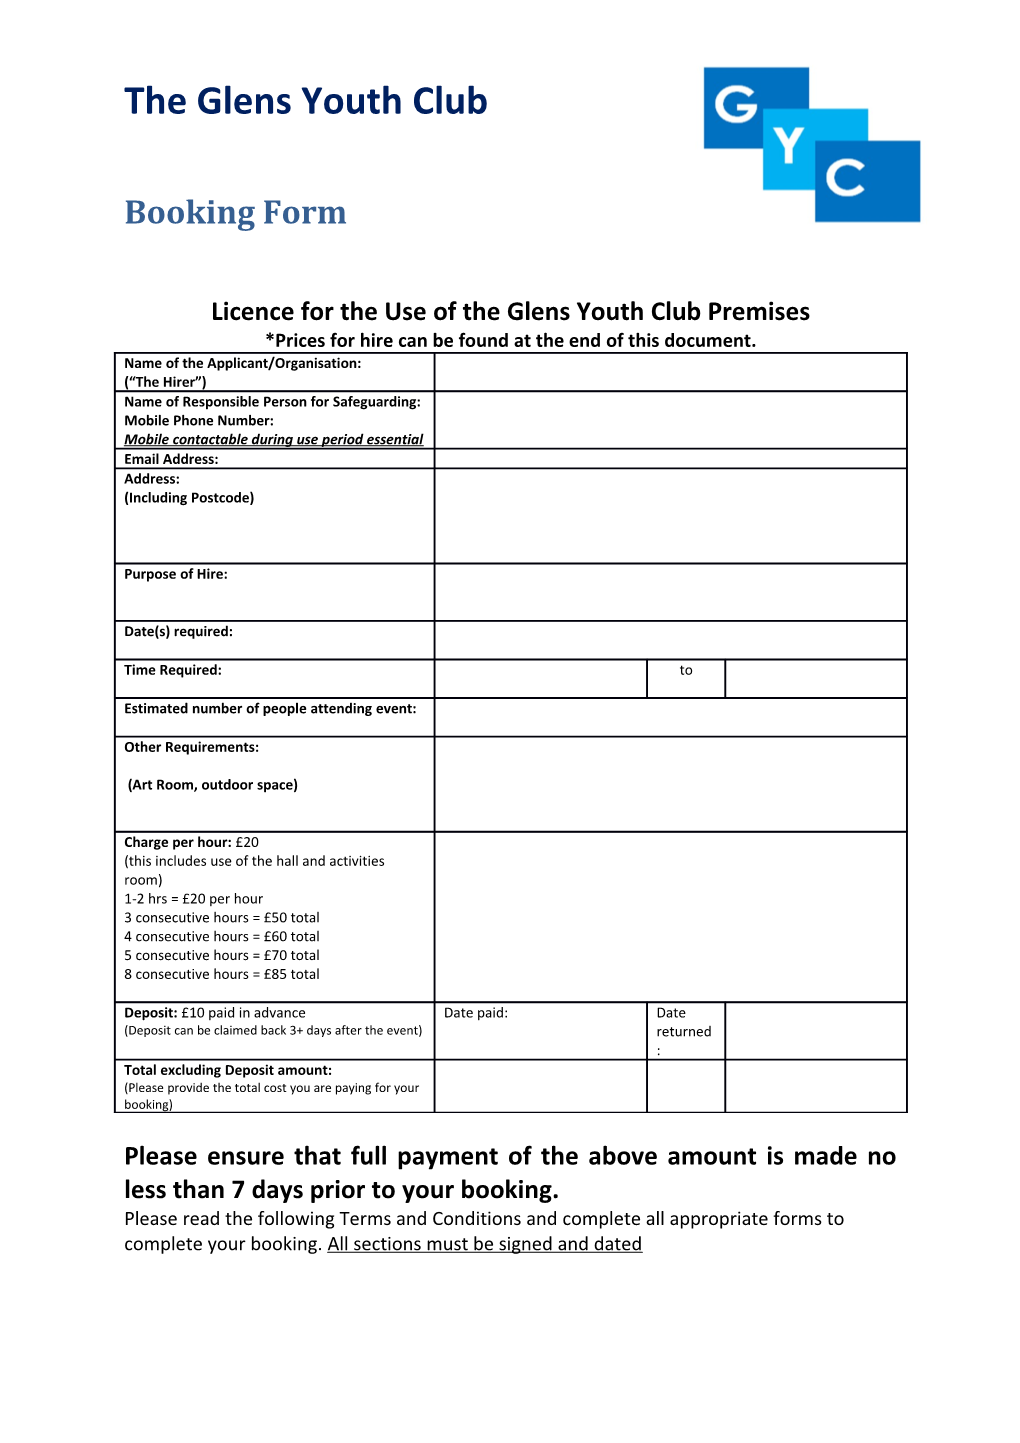 Licence for the Use of the Glens Youth Club Premises